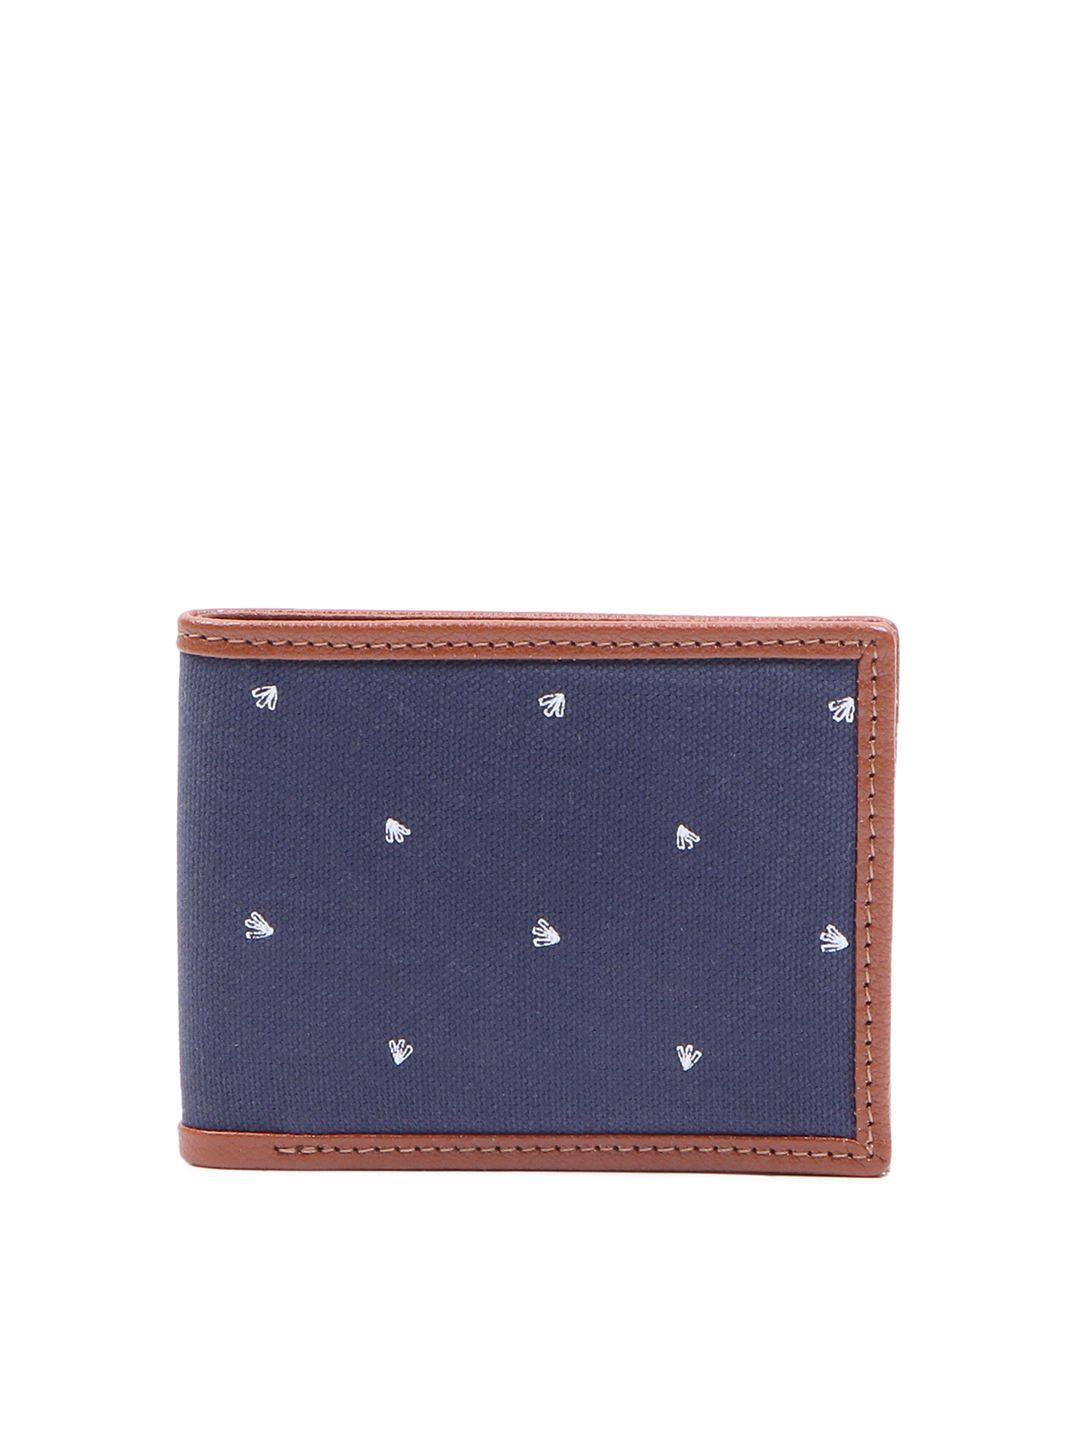 forever 21 men navy blue & brown printed two fold wallet